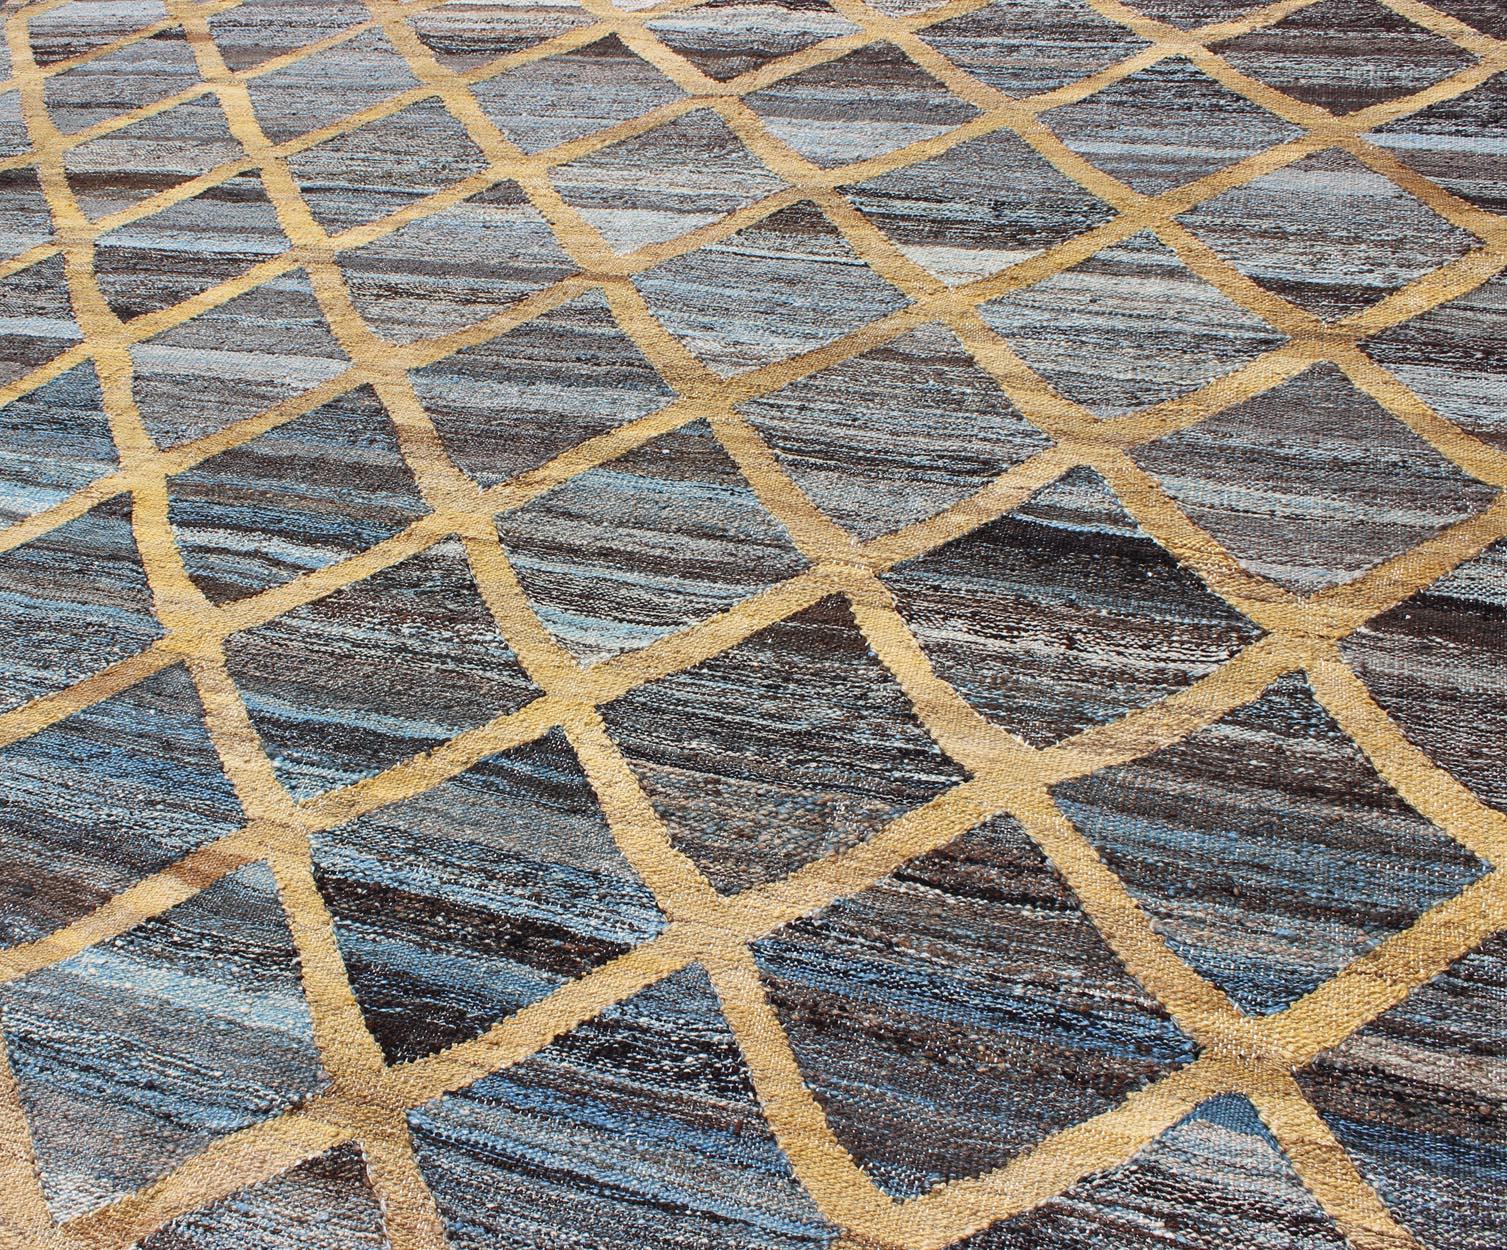 Keivan Woven Arts Flat-Weave Kilim in Diamond Gold Design With Blue and Charcoal. Keivan Woven Arts/ rug AFG-13486, country of origin / type: Afghanistan / Kilim
Measures: 6'4 x 8'10 
This colored piece features a design that evokes an easy vibe,